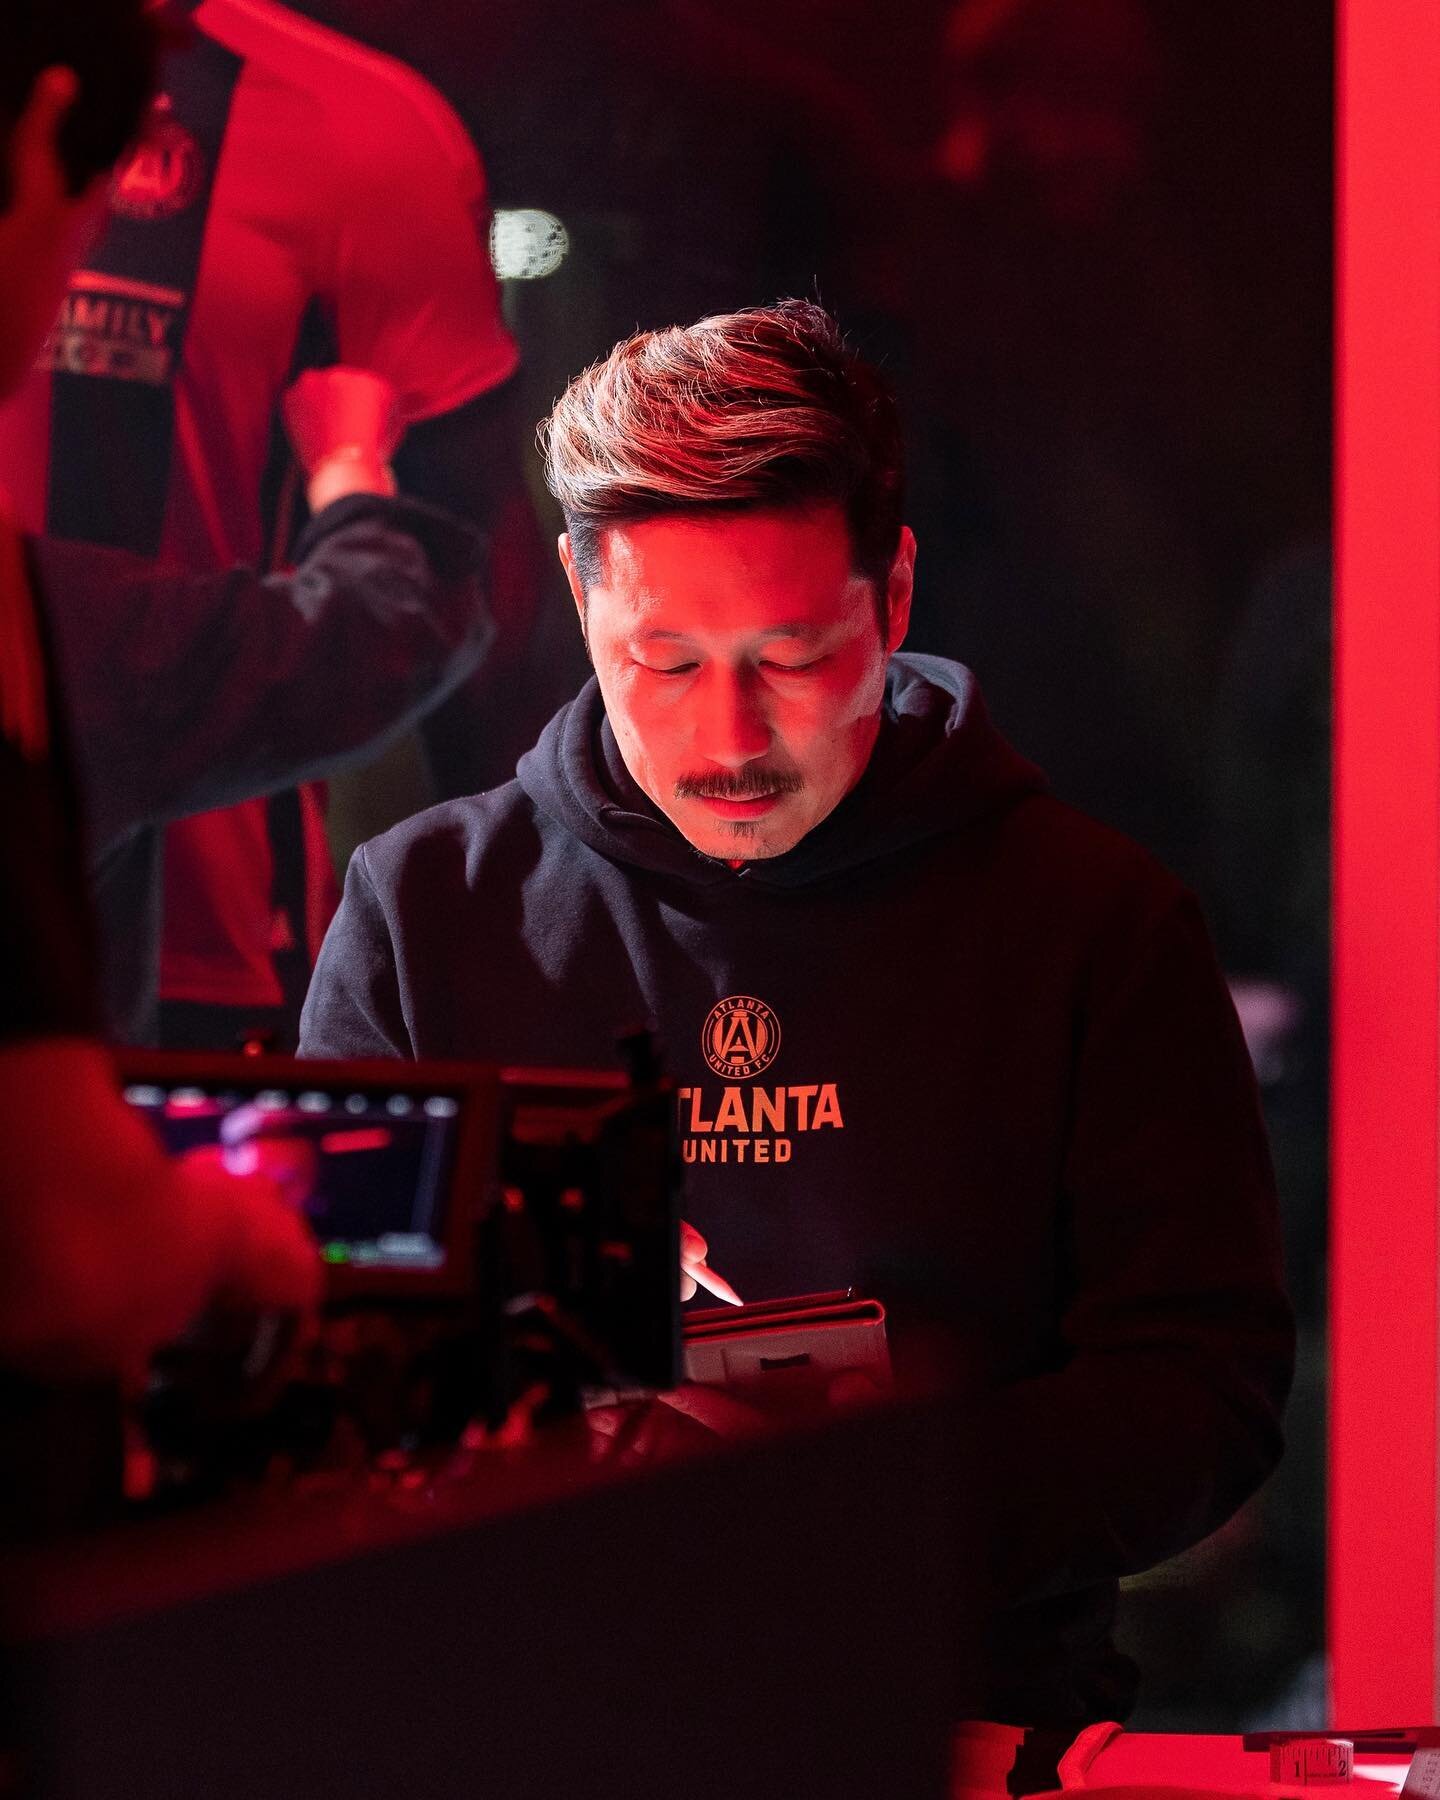 &ldquo;Designing&rdquo; in the dark ✍️ Thx to @rafycreative and the rest of the ATL UTD video team for the opportunity to be in the 17s&rsquo; Kit launch video 🎬🔴⚫️